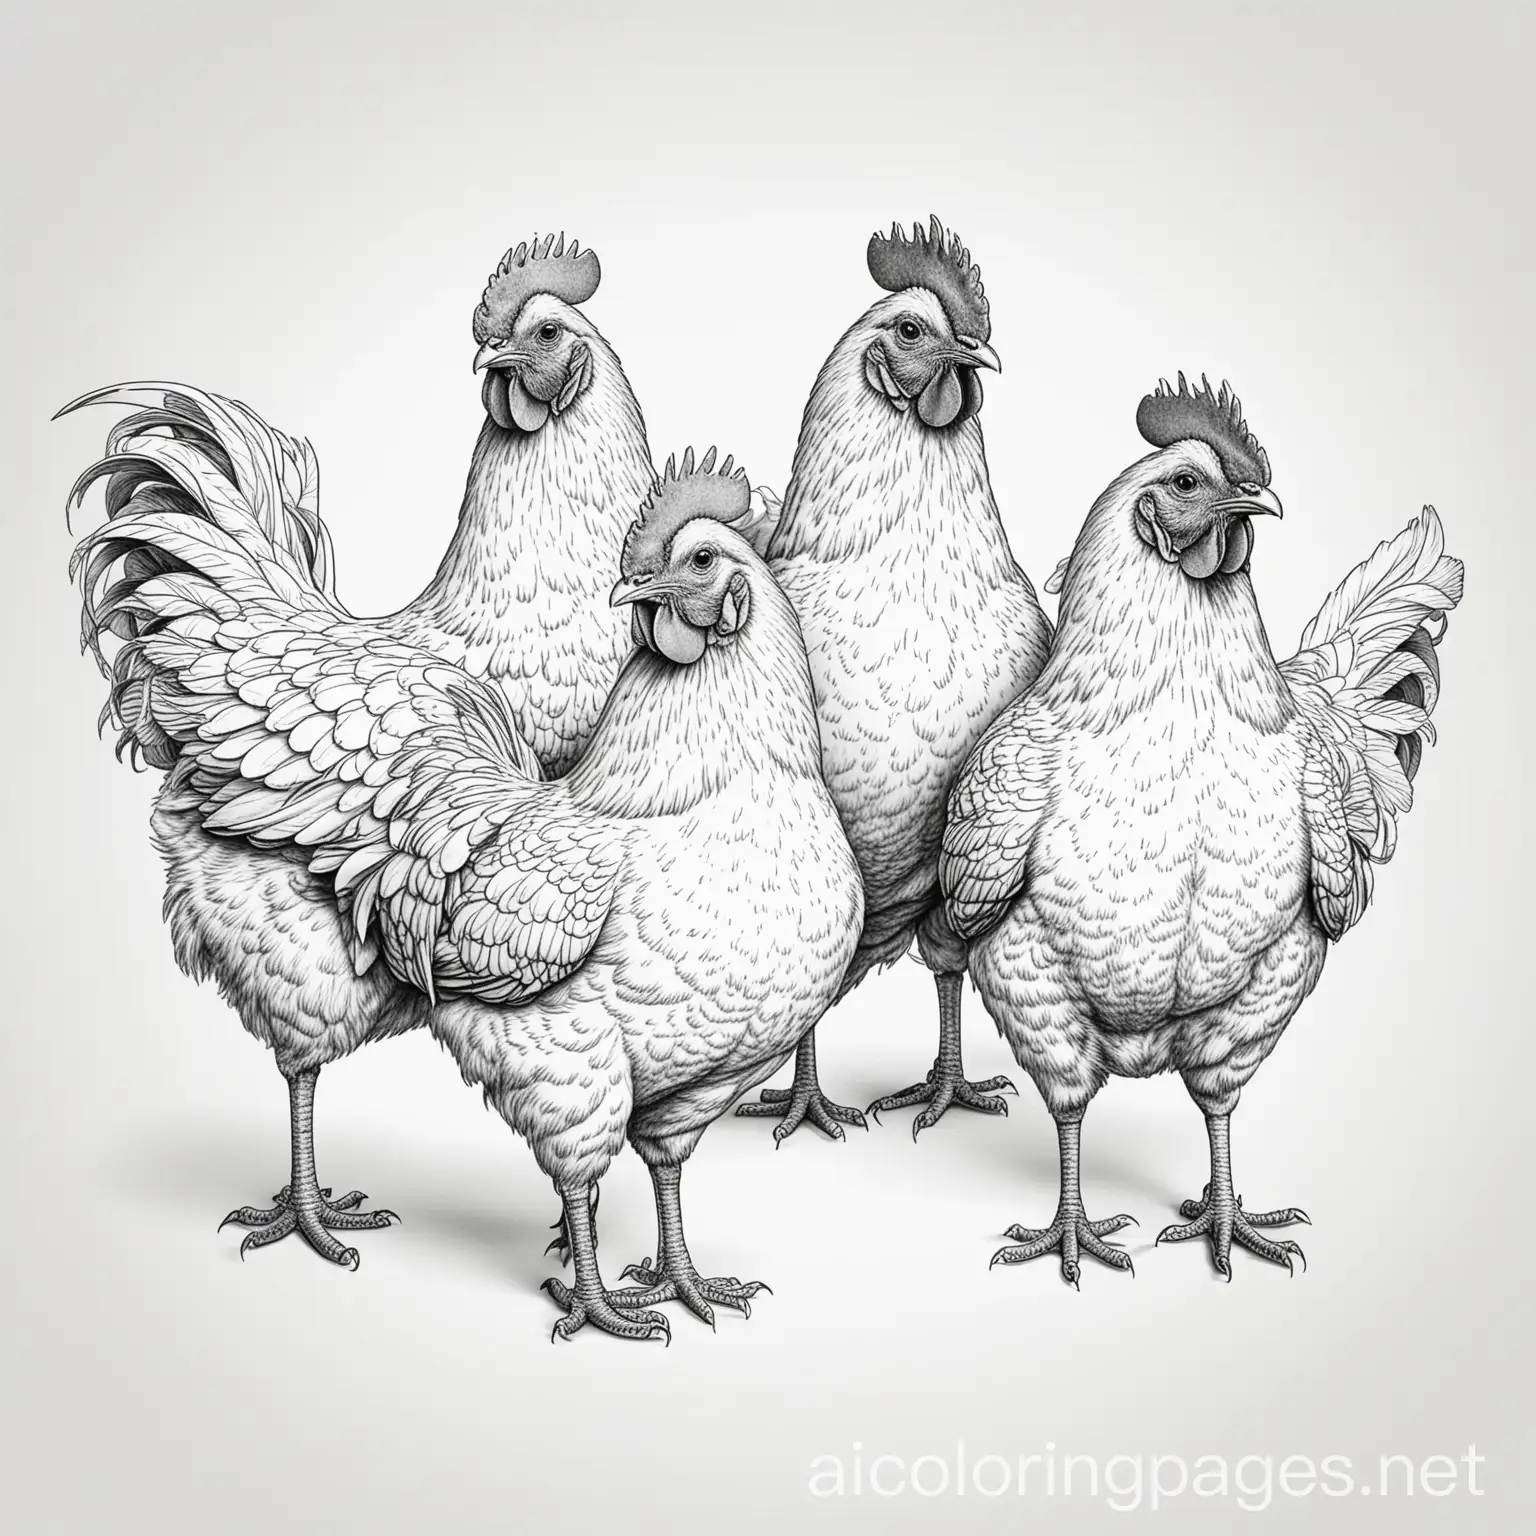 Chickens-Coloring-Page-in-Simple-Black-and-White-Line-Art-on-White-Background